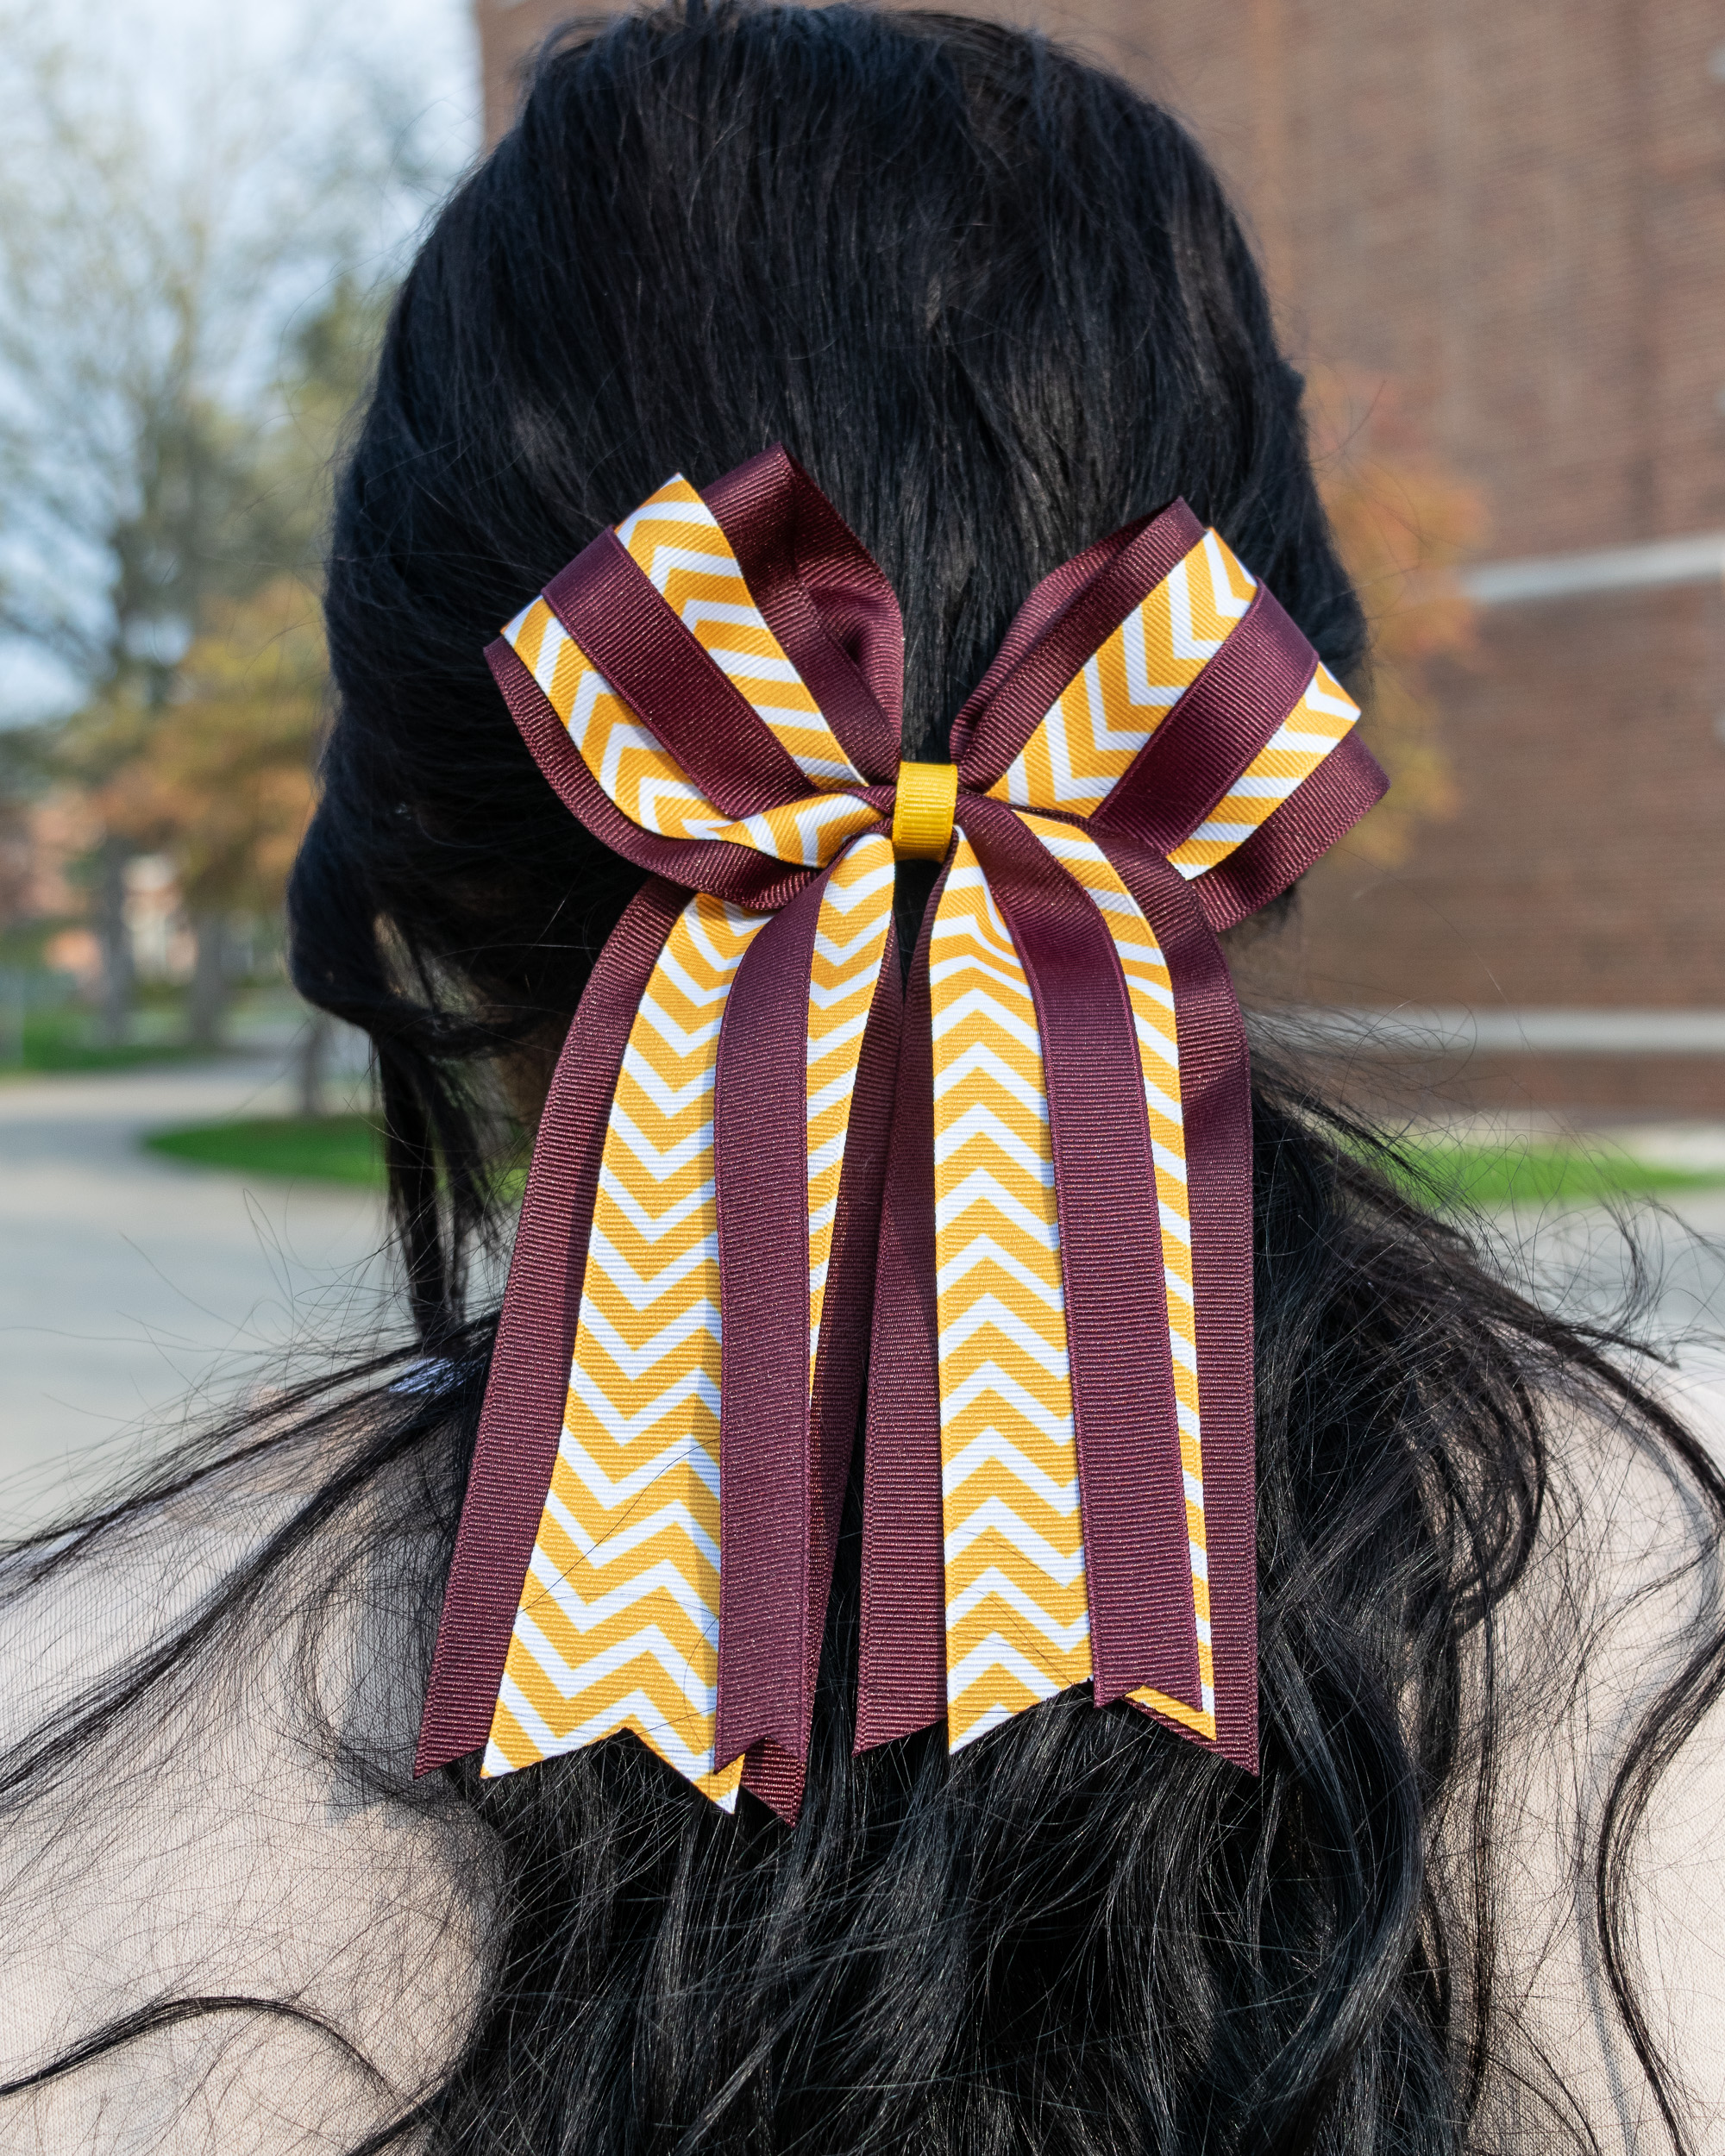 Maroon & Gold with White Chevron Layered Bow Hair Tie (SKU 5009076198)